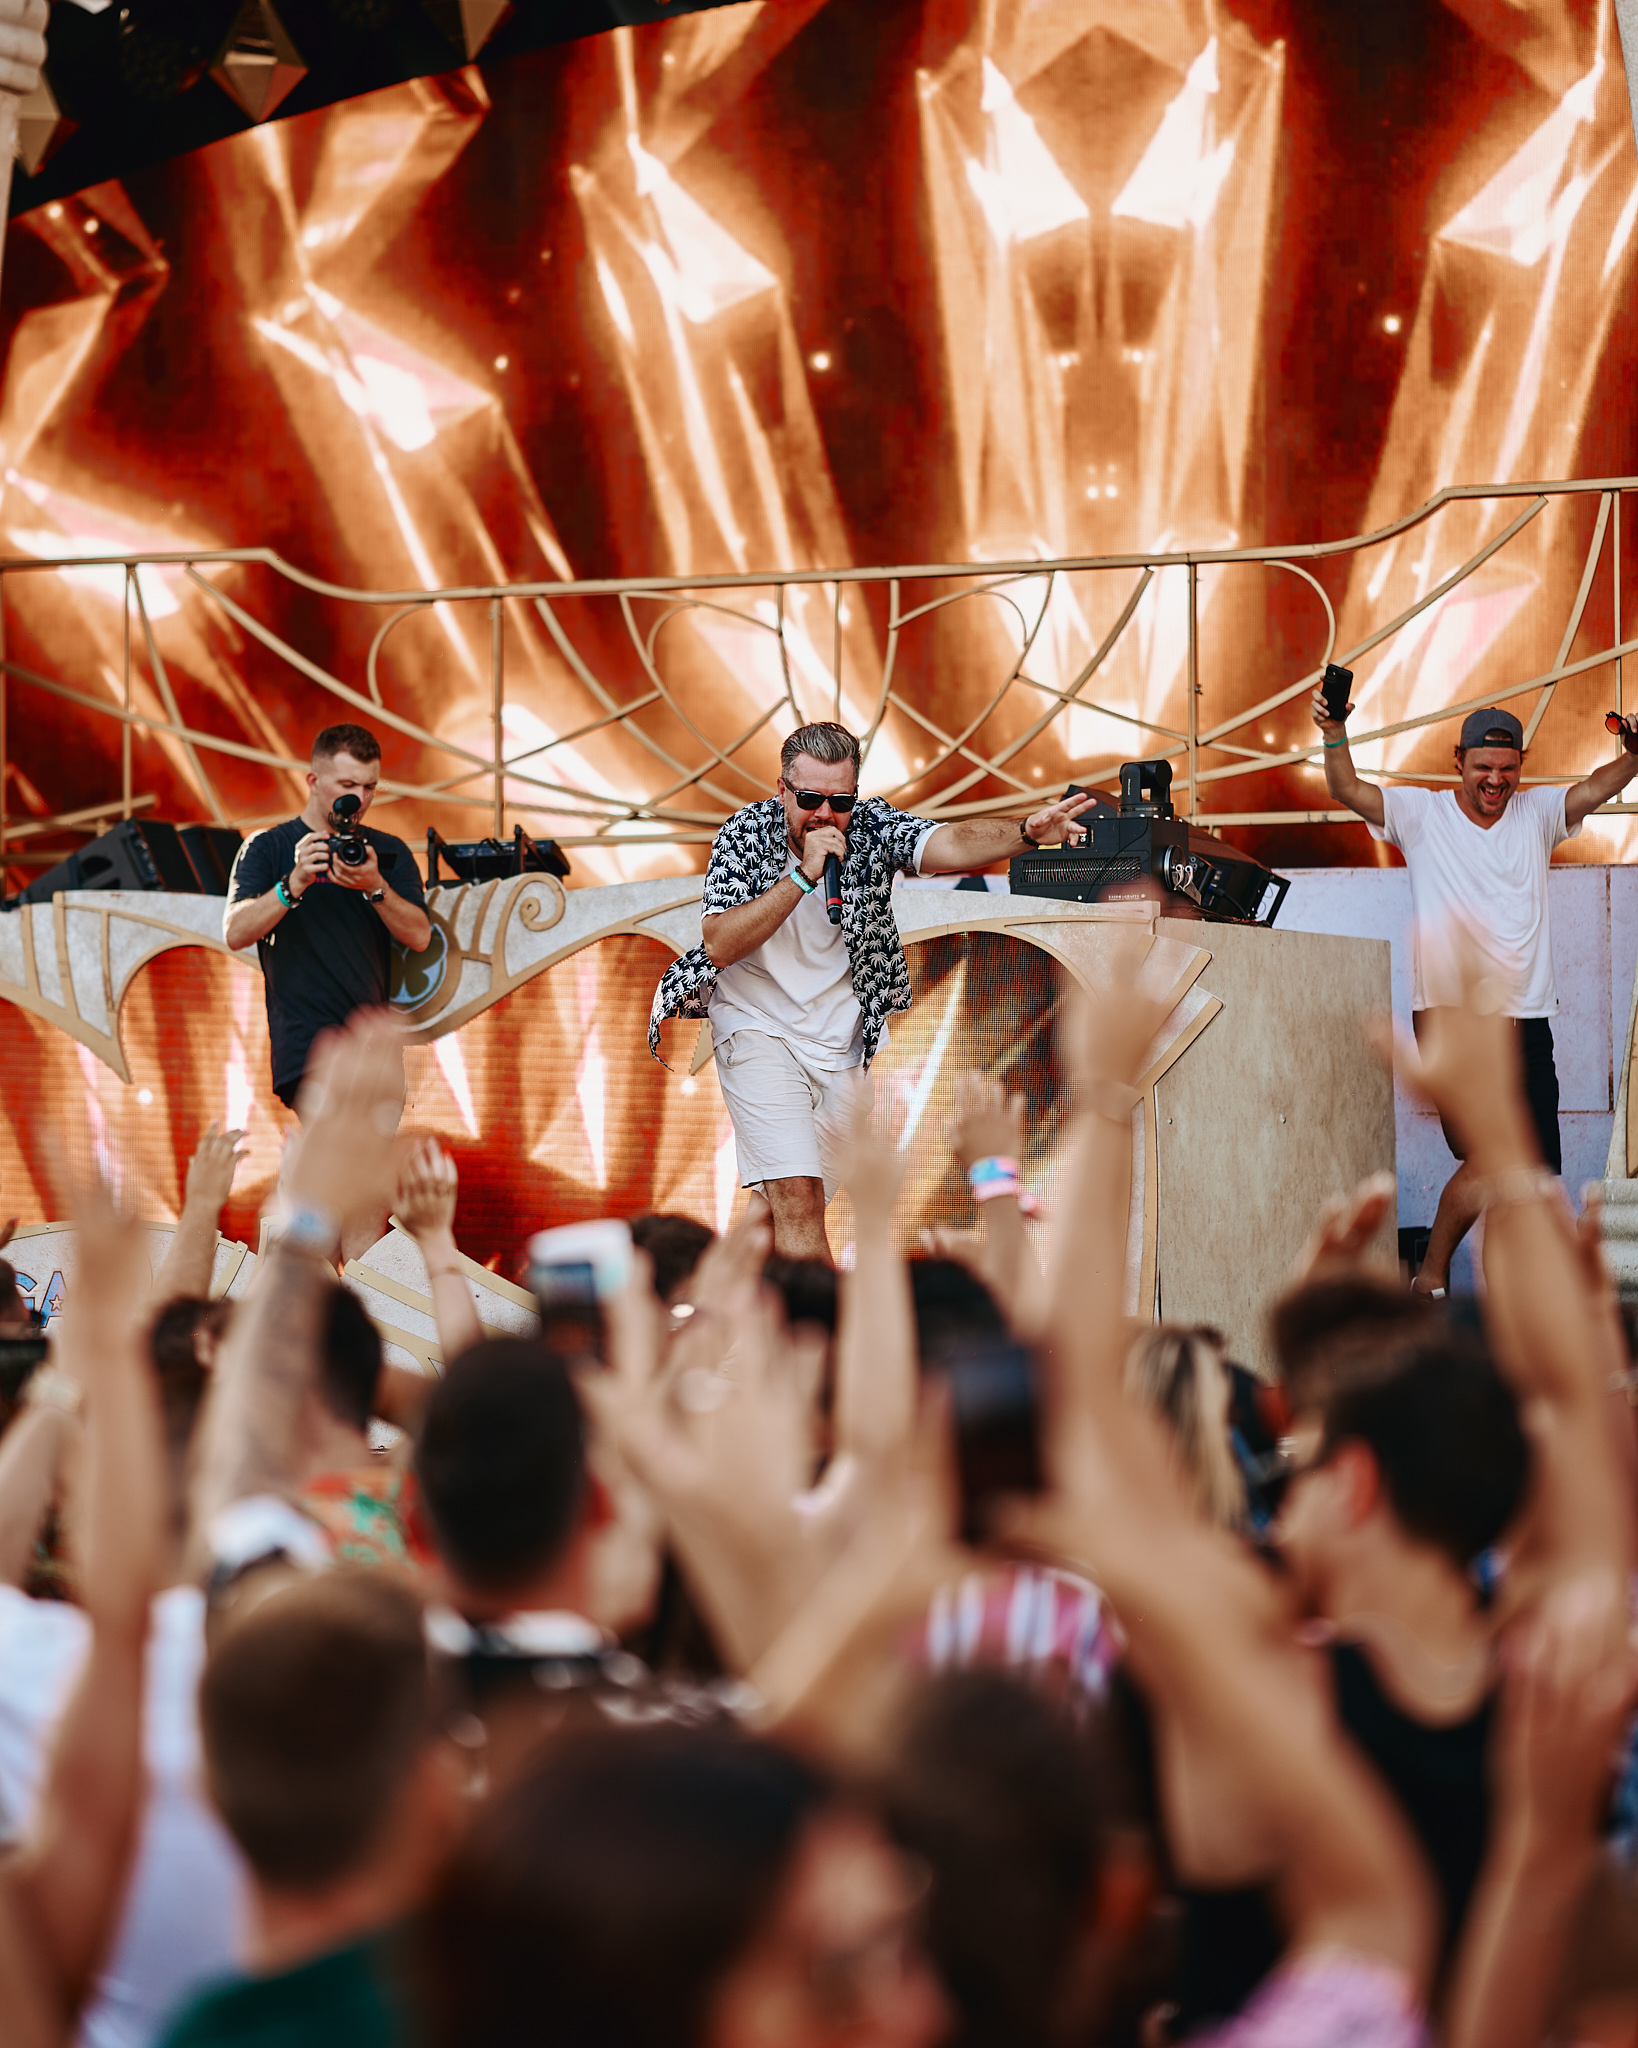 Mathieu Koss reveal the after movie of his show at the Ushuaia Ibiza!